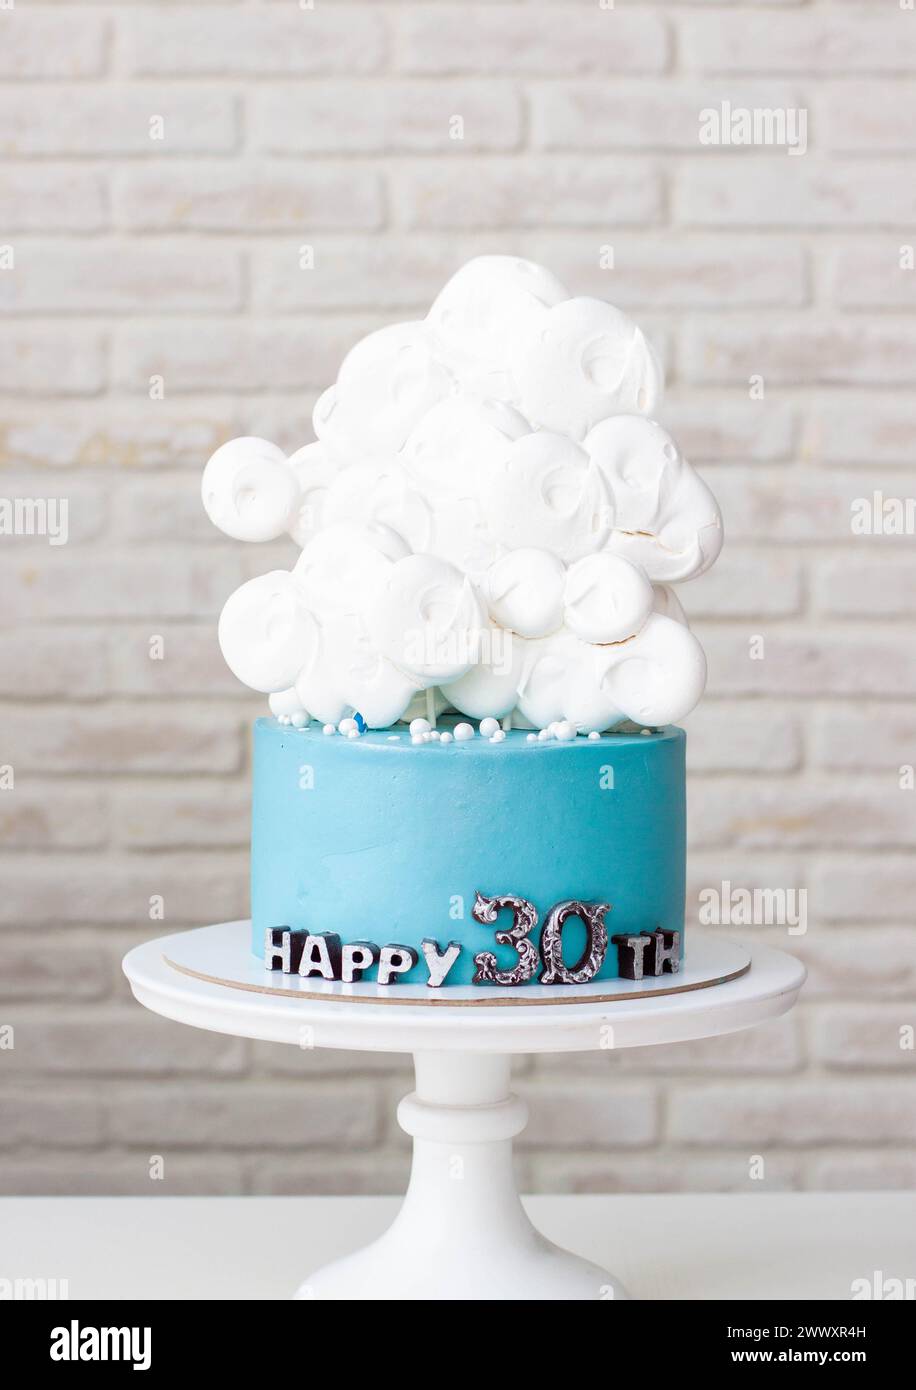 Blue birthday cake with white clouds for 30th anniversary on neutral background Stock Photo